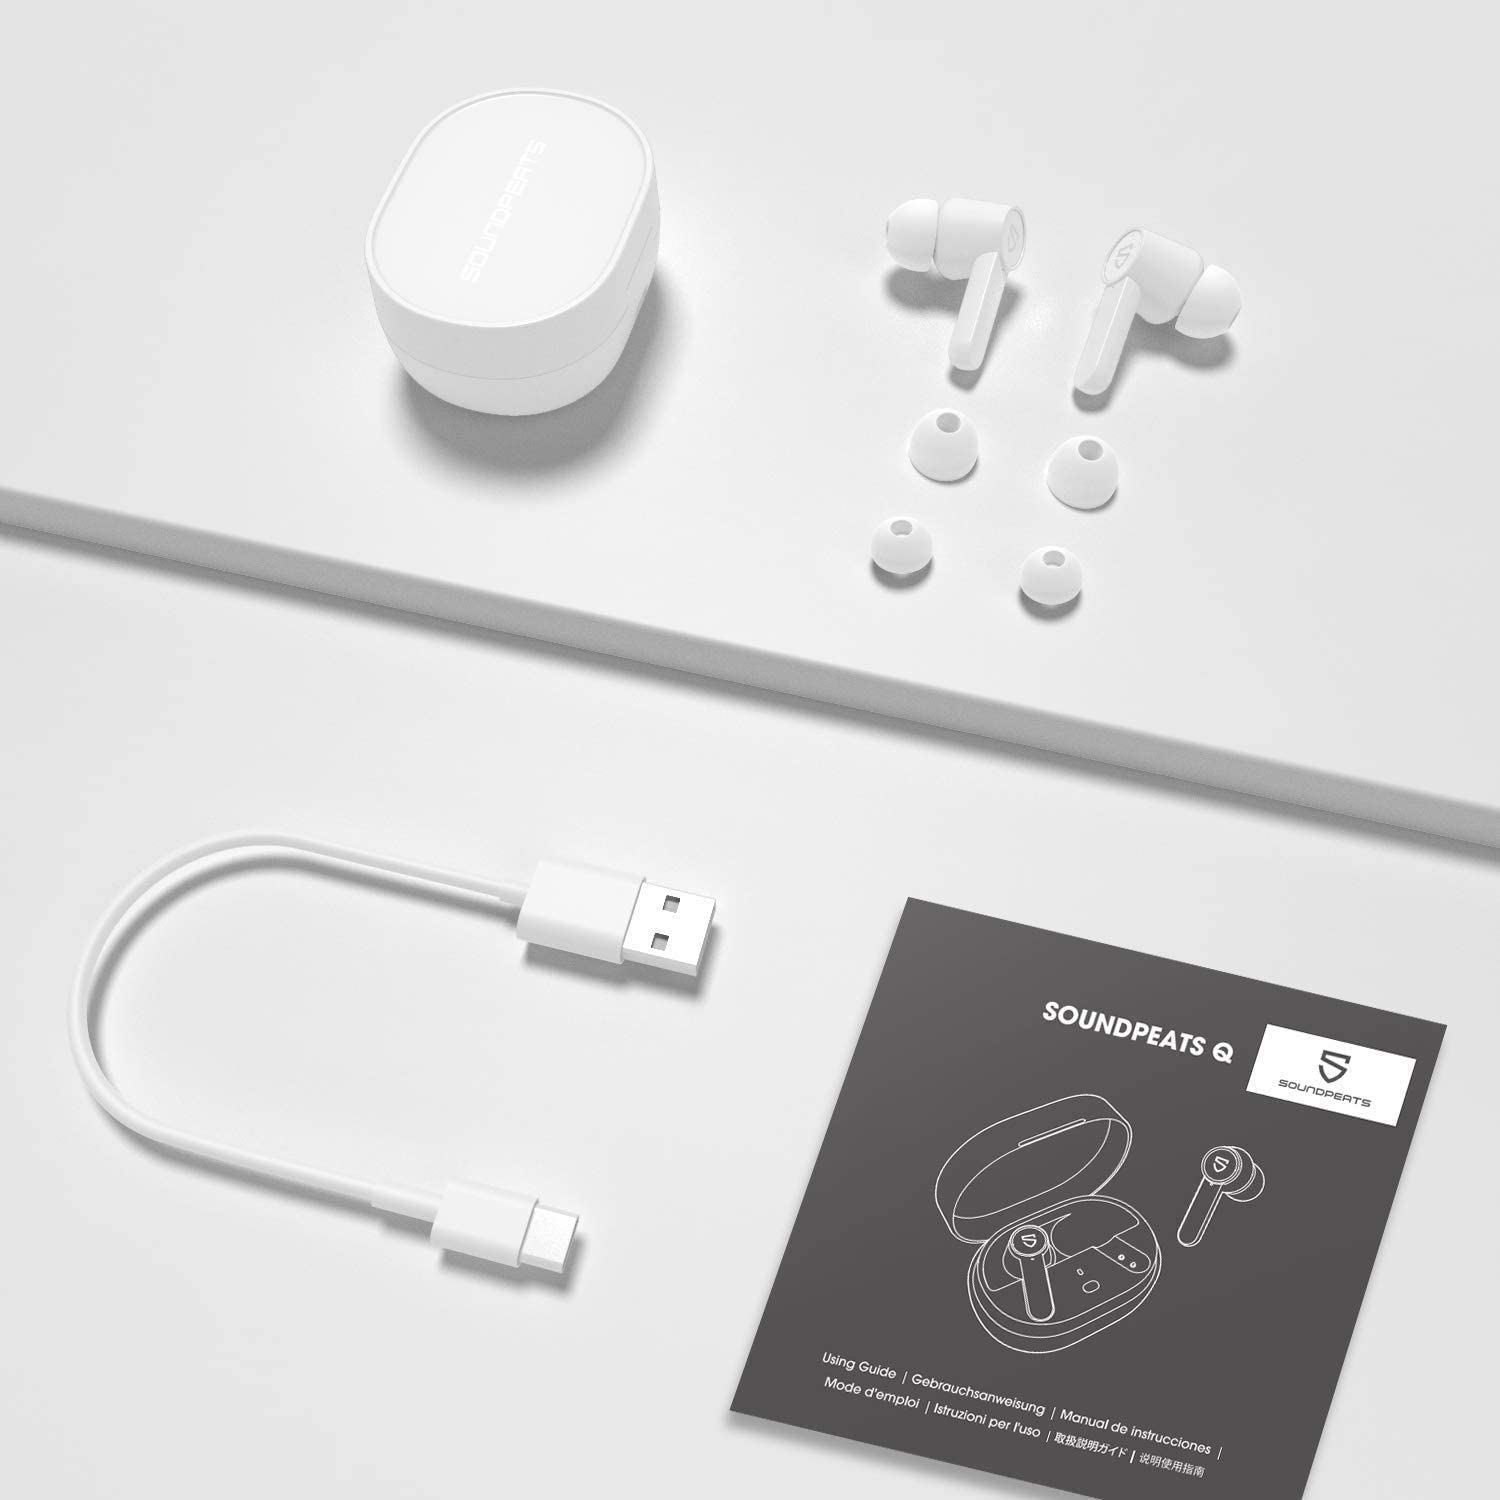 SoundPEATS Q TWS Earbuds, 4 Mics, Wireless Charging, Touch Control - White